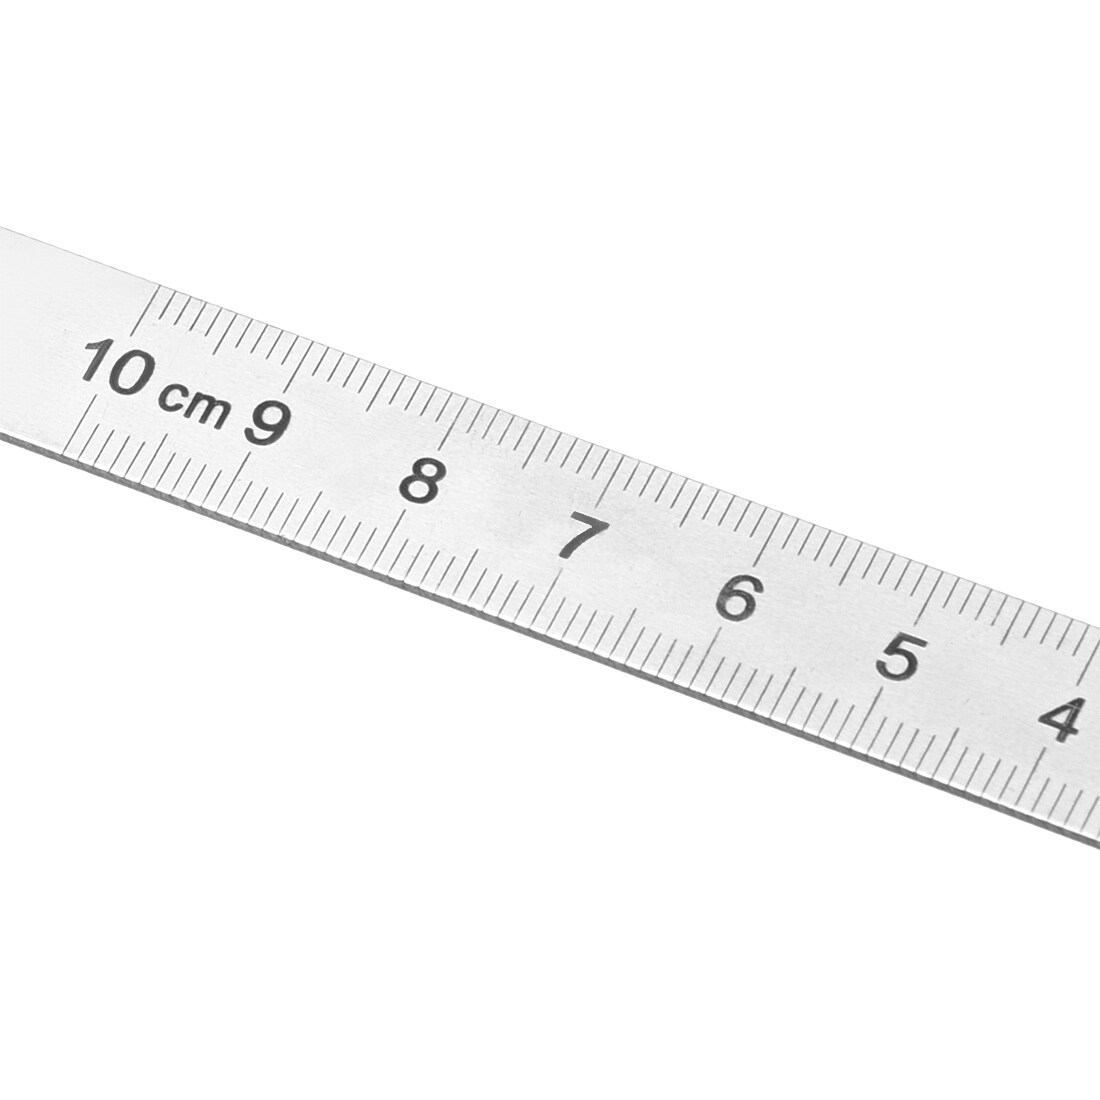 BTMB 180 Degrees Round Head Protractor Angle Ruler Finder Arm Rule Measure Tool for Woodworking,Craftsman,Painting 100mm